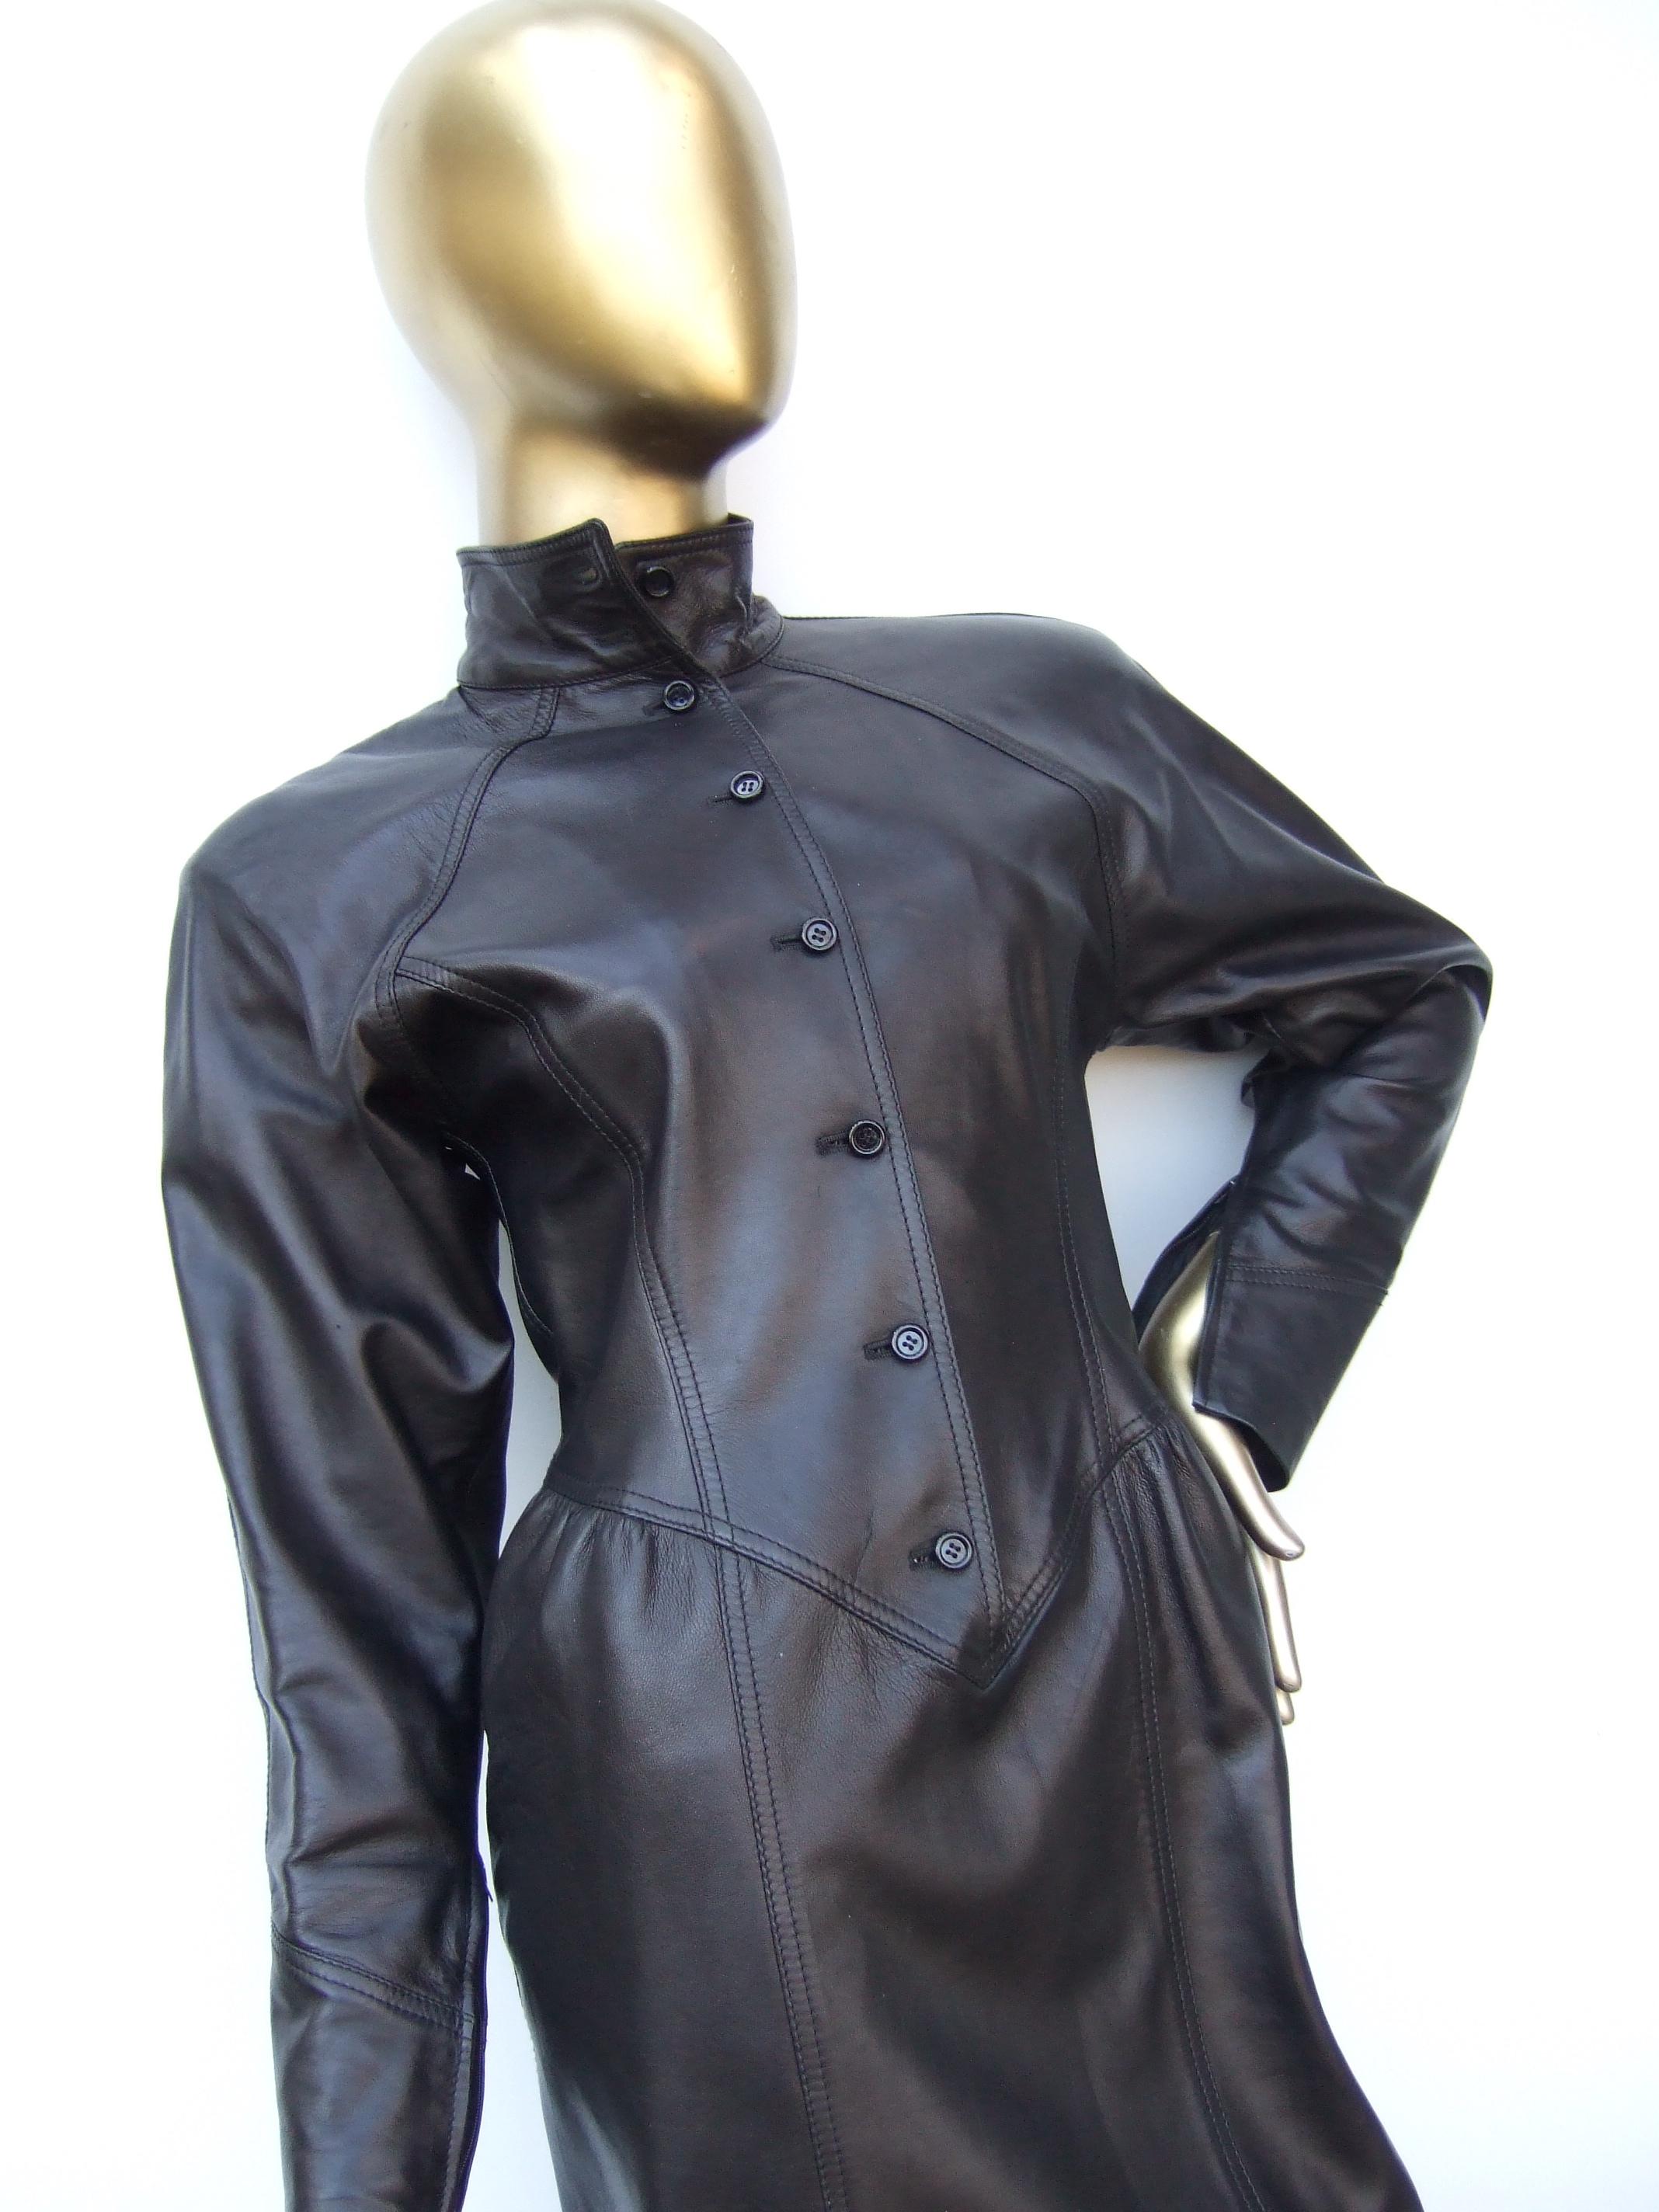 Emanuel Ungaro Paris Avant-garde brown leather dress Made in Italy c 1980s
The edgy dress is constructed with supple smooth chocolate brown leather 
A series of small black resin buttons run down the front
The sleeve openings have a zippered